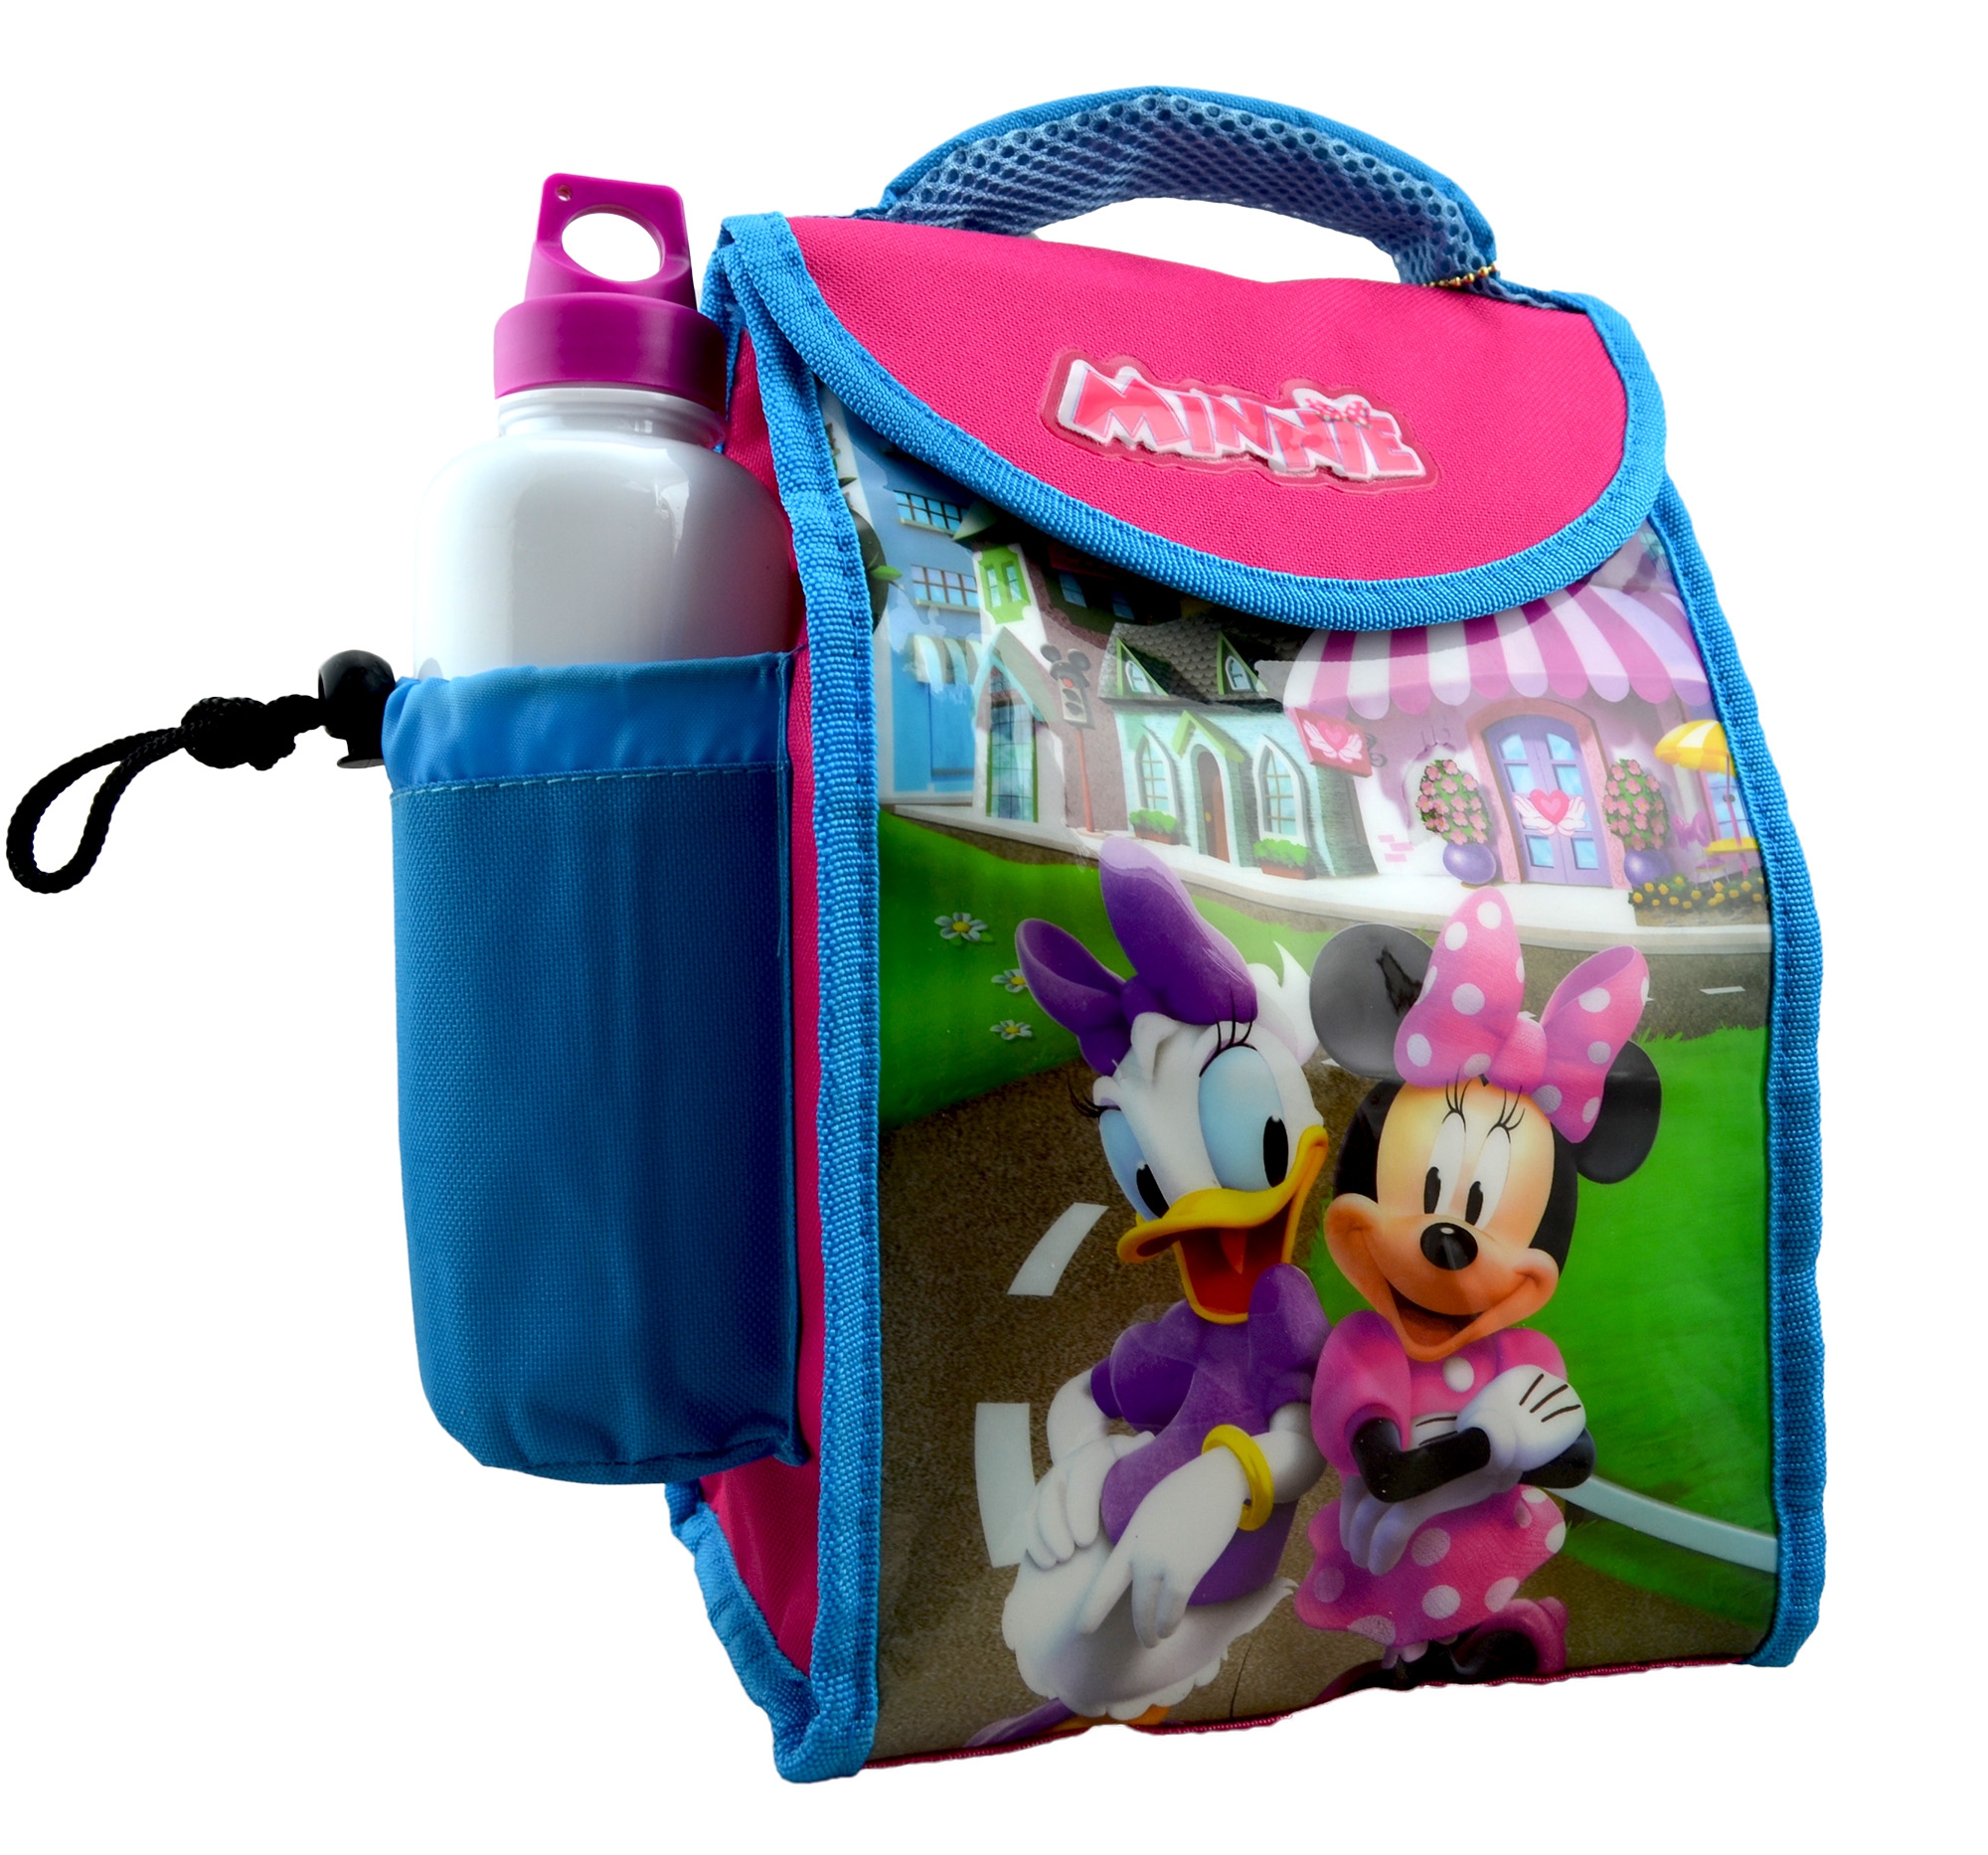 Disney Minnie Mouse 'Friends' School Lunch Bag with Bottle